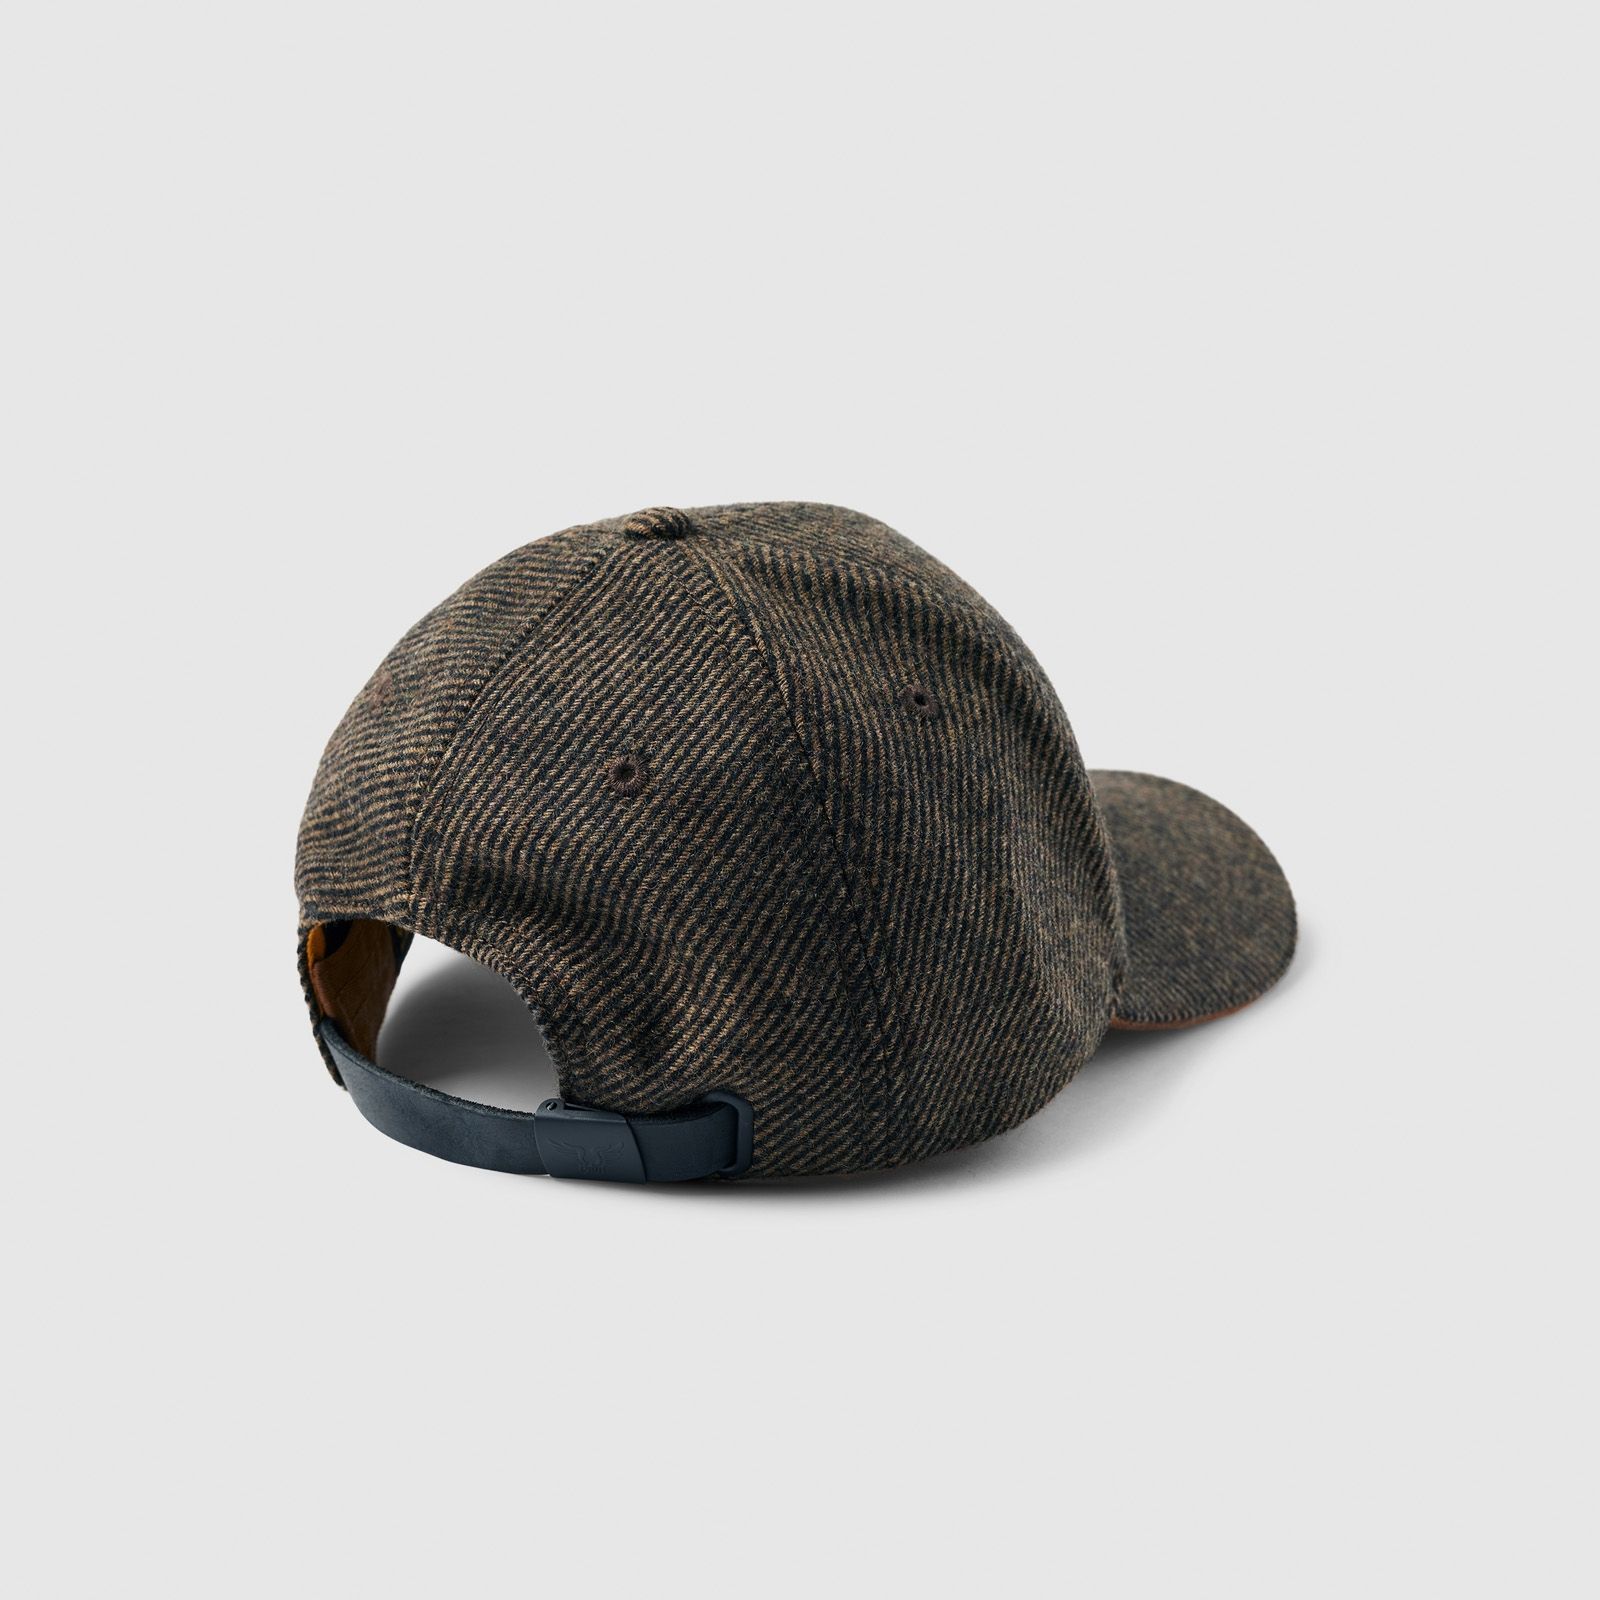 Pme Legend Cap Brushed flanel with tailwing b Wood Thrush 00105558-8186